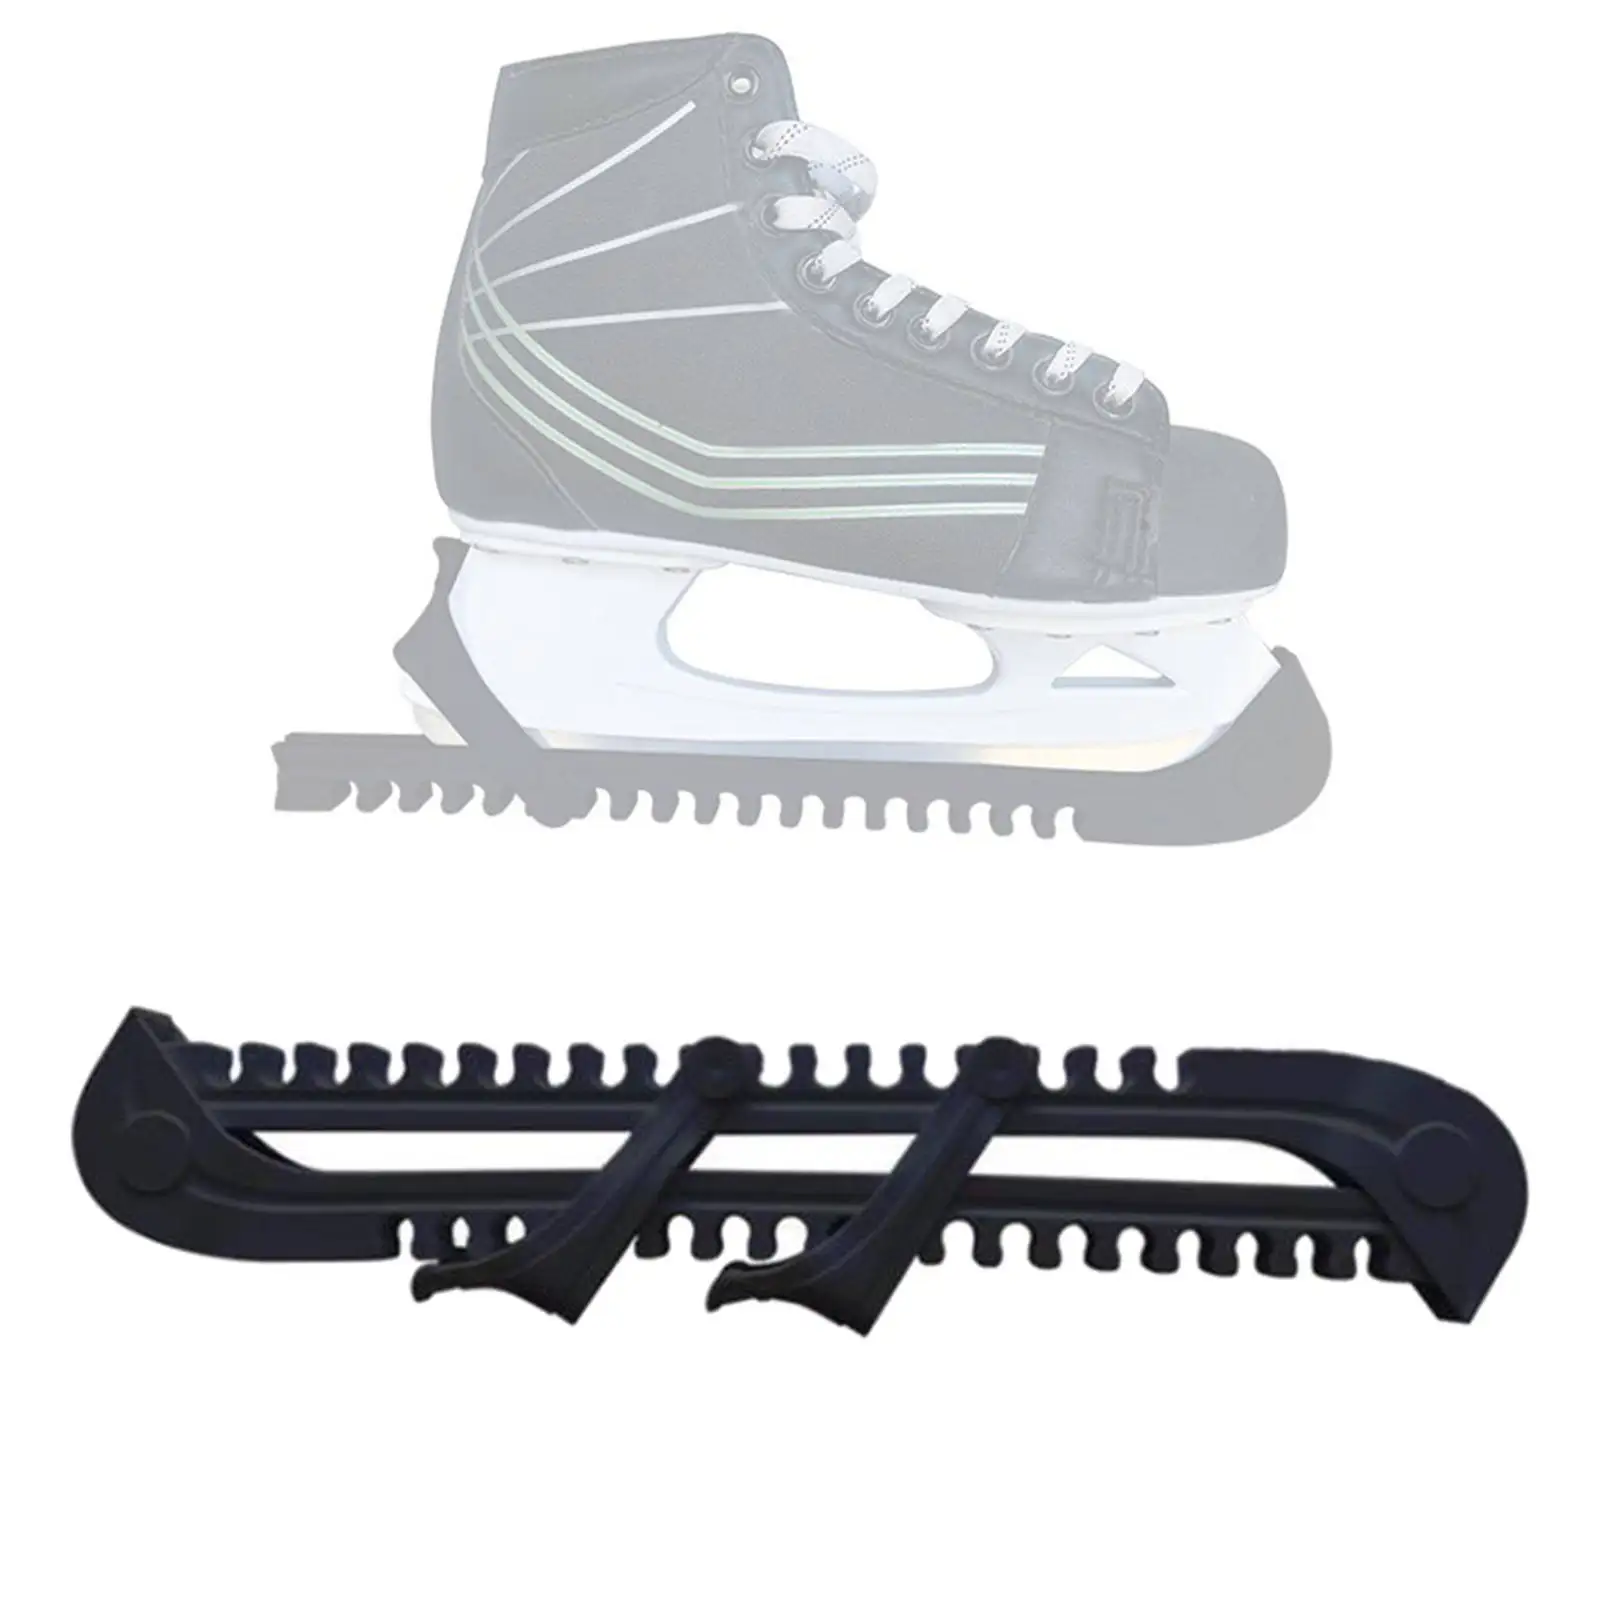 Skate Blade Guards Soft Accessory Premium Plastic Ice Figure Skating Repalcement Parts Protective Ice Skates Protect Sleeve